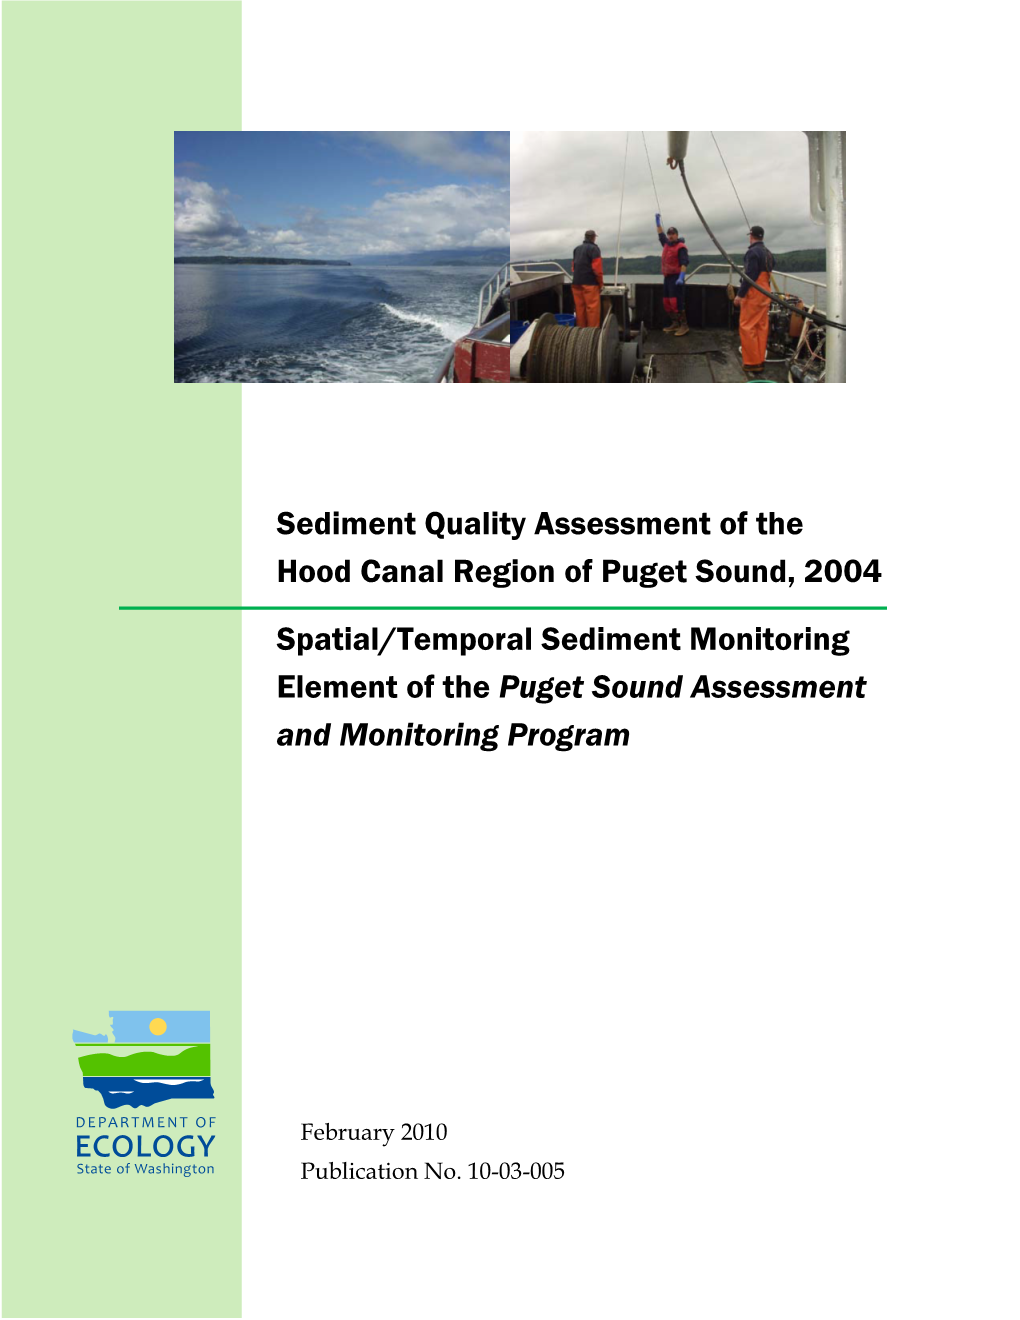 Sediment Quality Assessment of the Hood Canal Region of Puget Sound, 2004